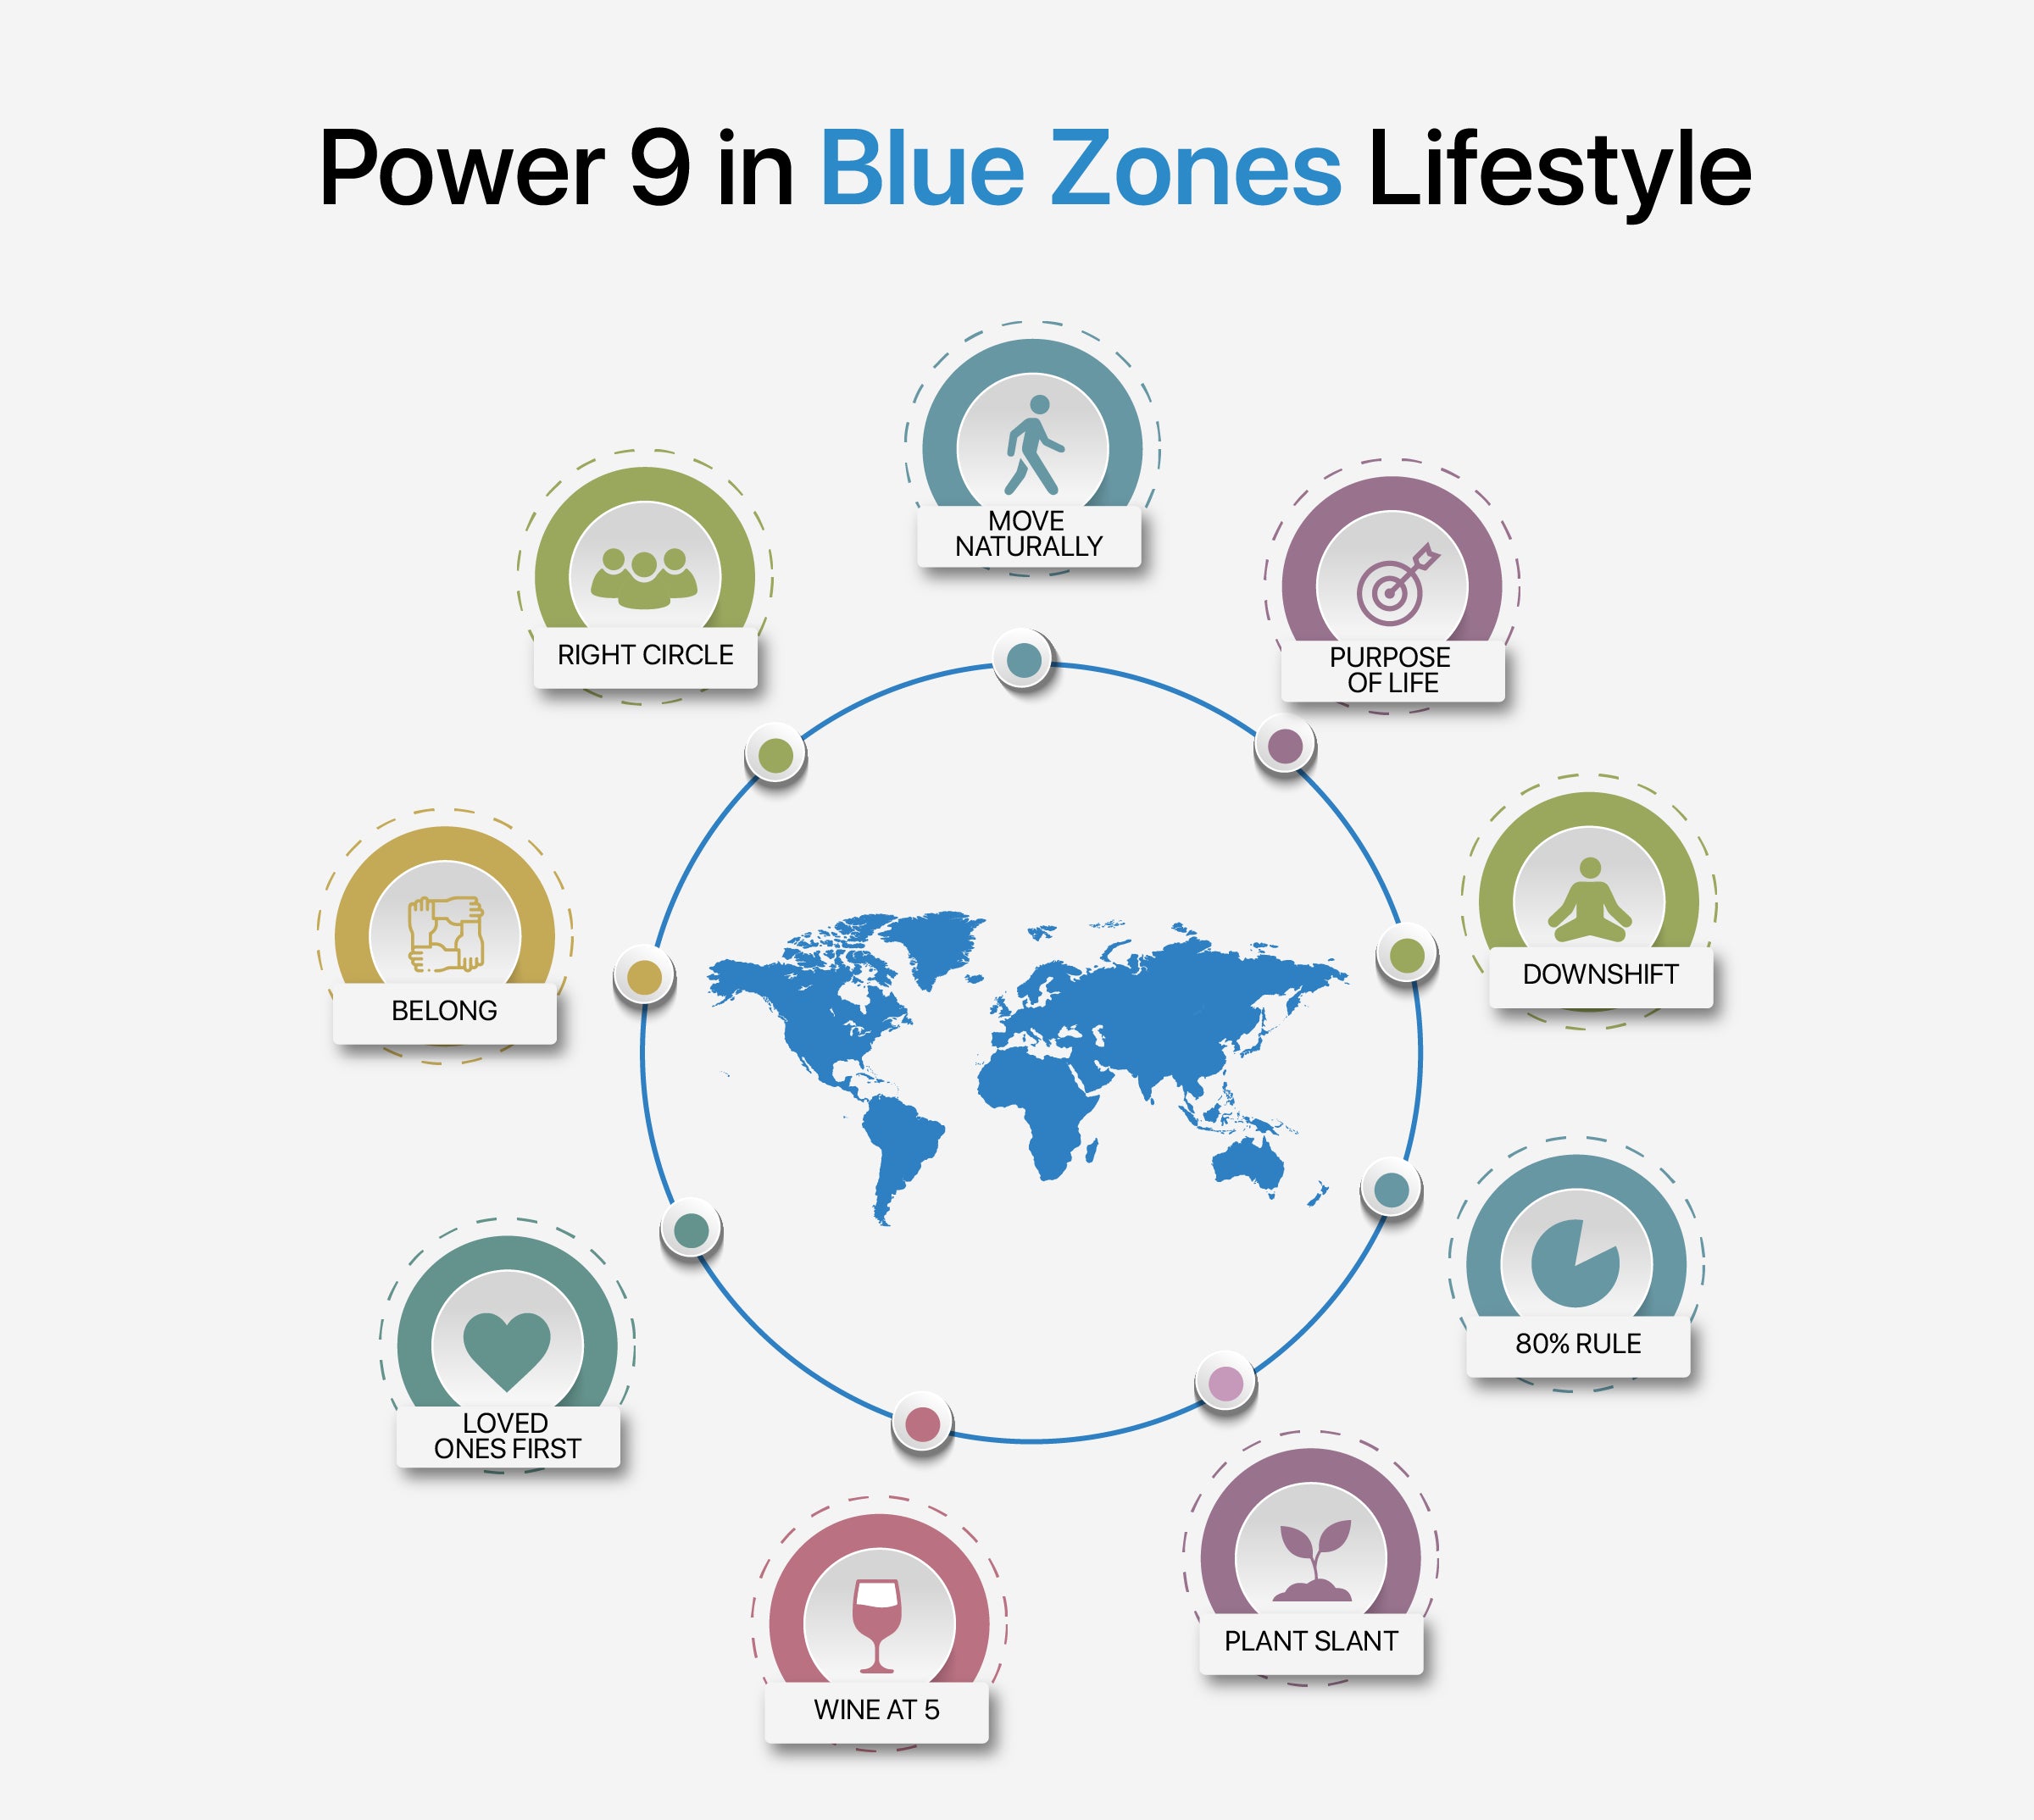 Power 9 in Blue Zones Lifestyle